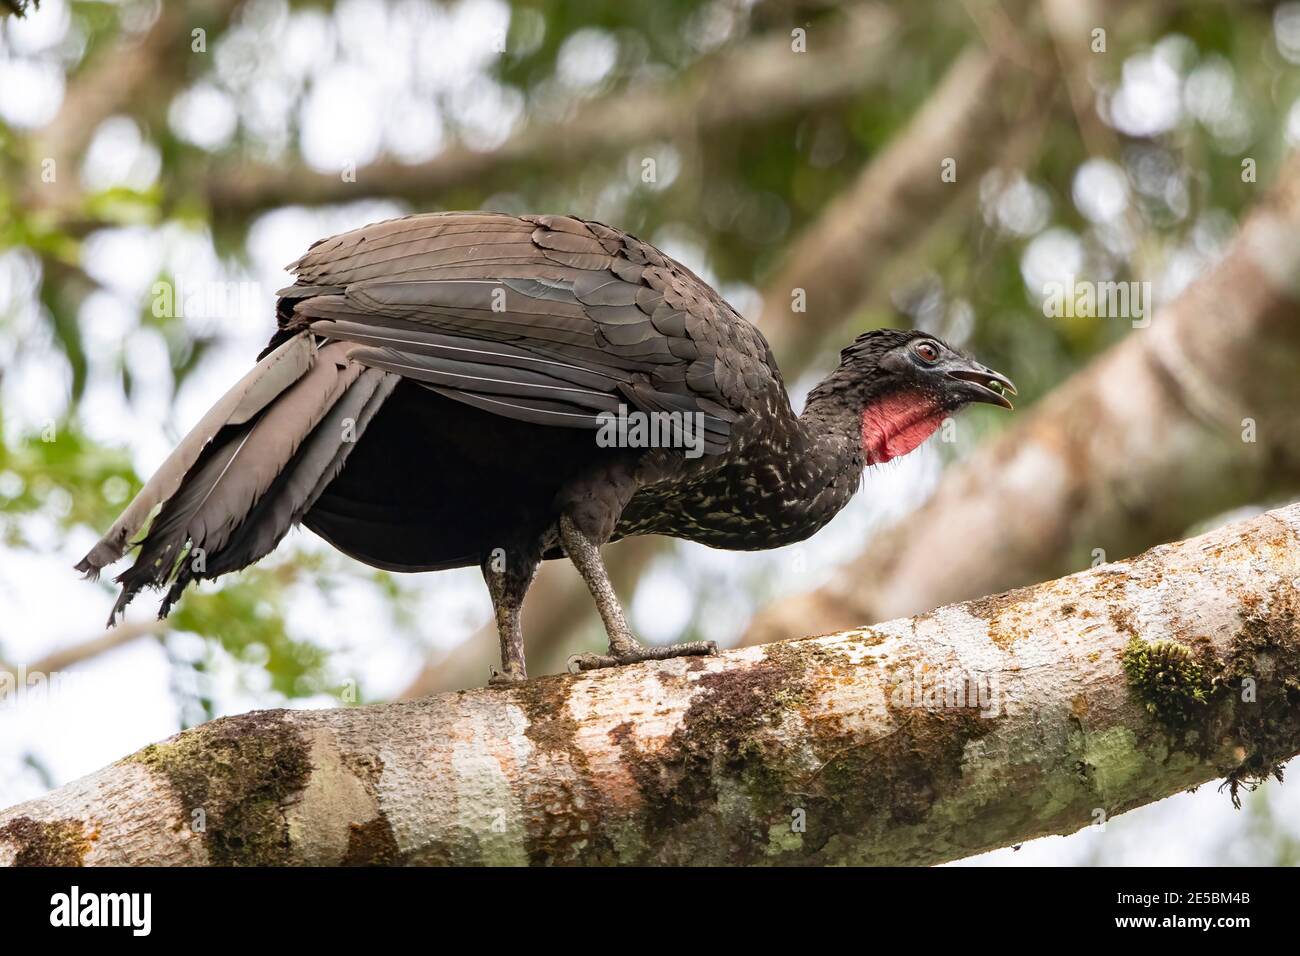 Crested Guan, Penelope purpurascens, single adult eating fruit while  perched in tropical forest, La Selva, Costa Rica, 4 April 2018 Stock Photo